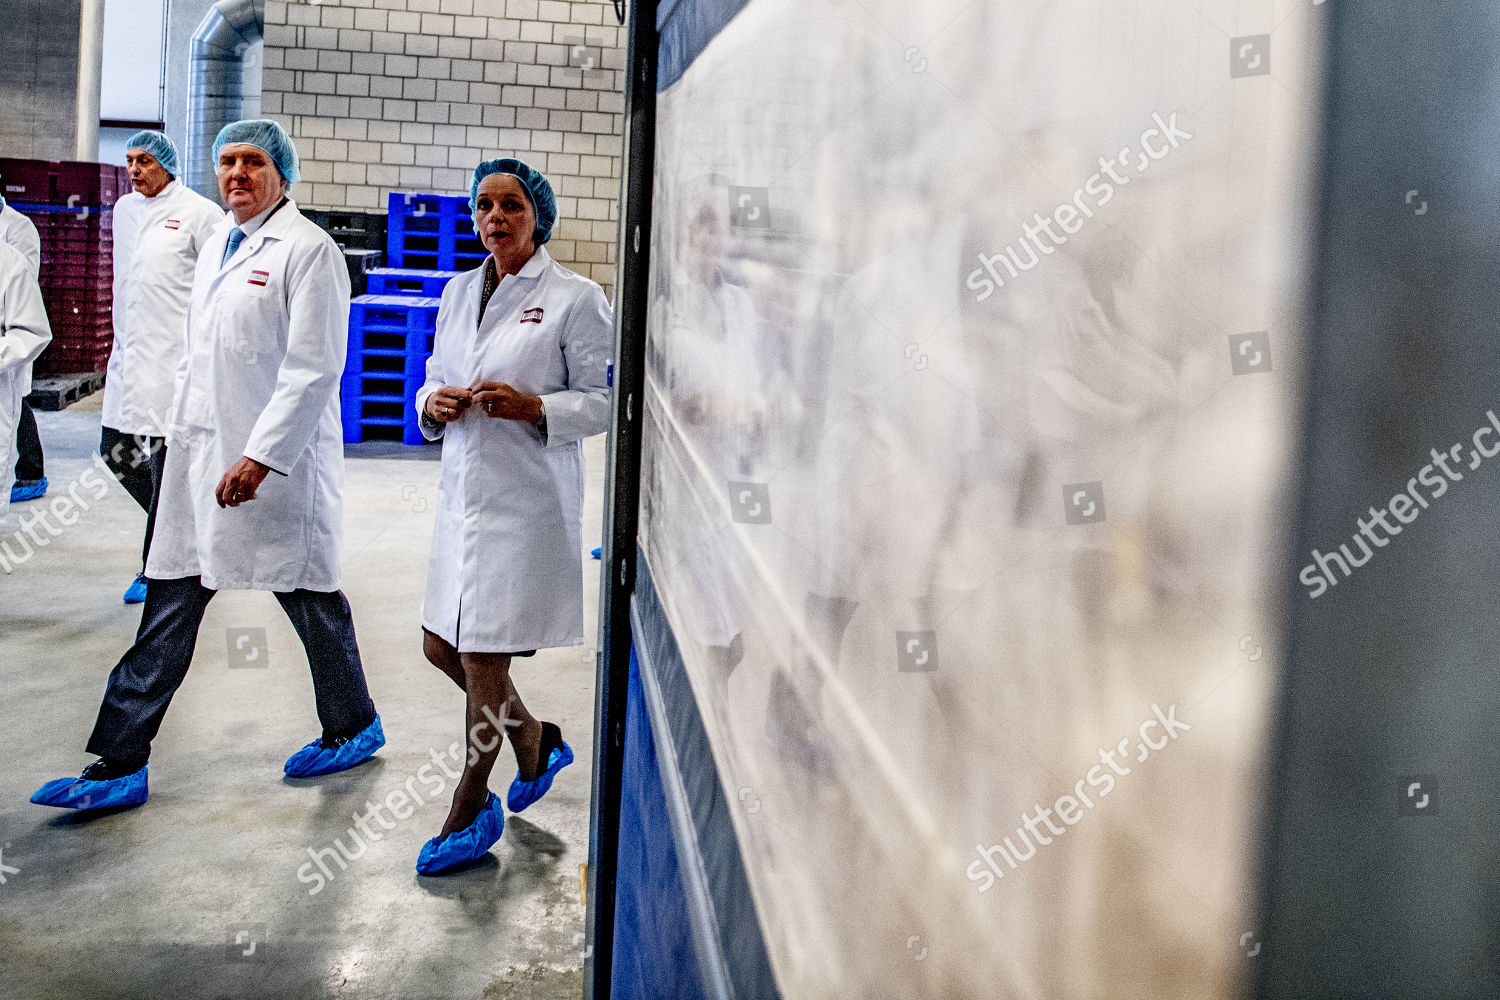 king-willem-alexander-is-making-a-working-visit-to-two-companies-in-brainport-eindhoven-helmond-the-netherlands-shutterstock-editorial-10031459aa.jpg